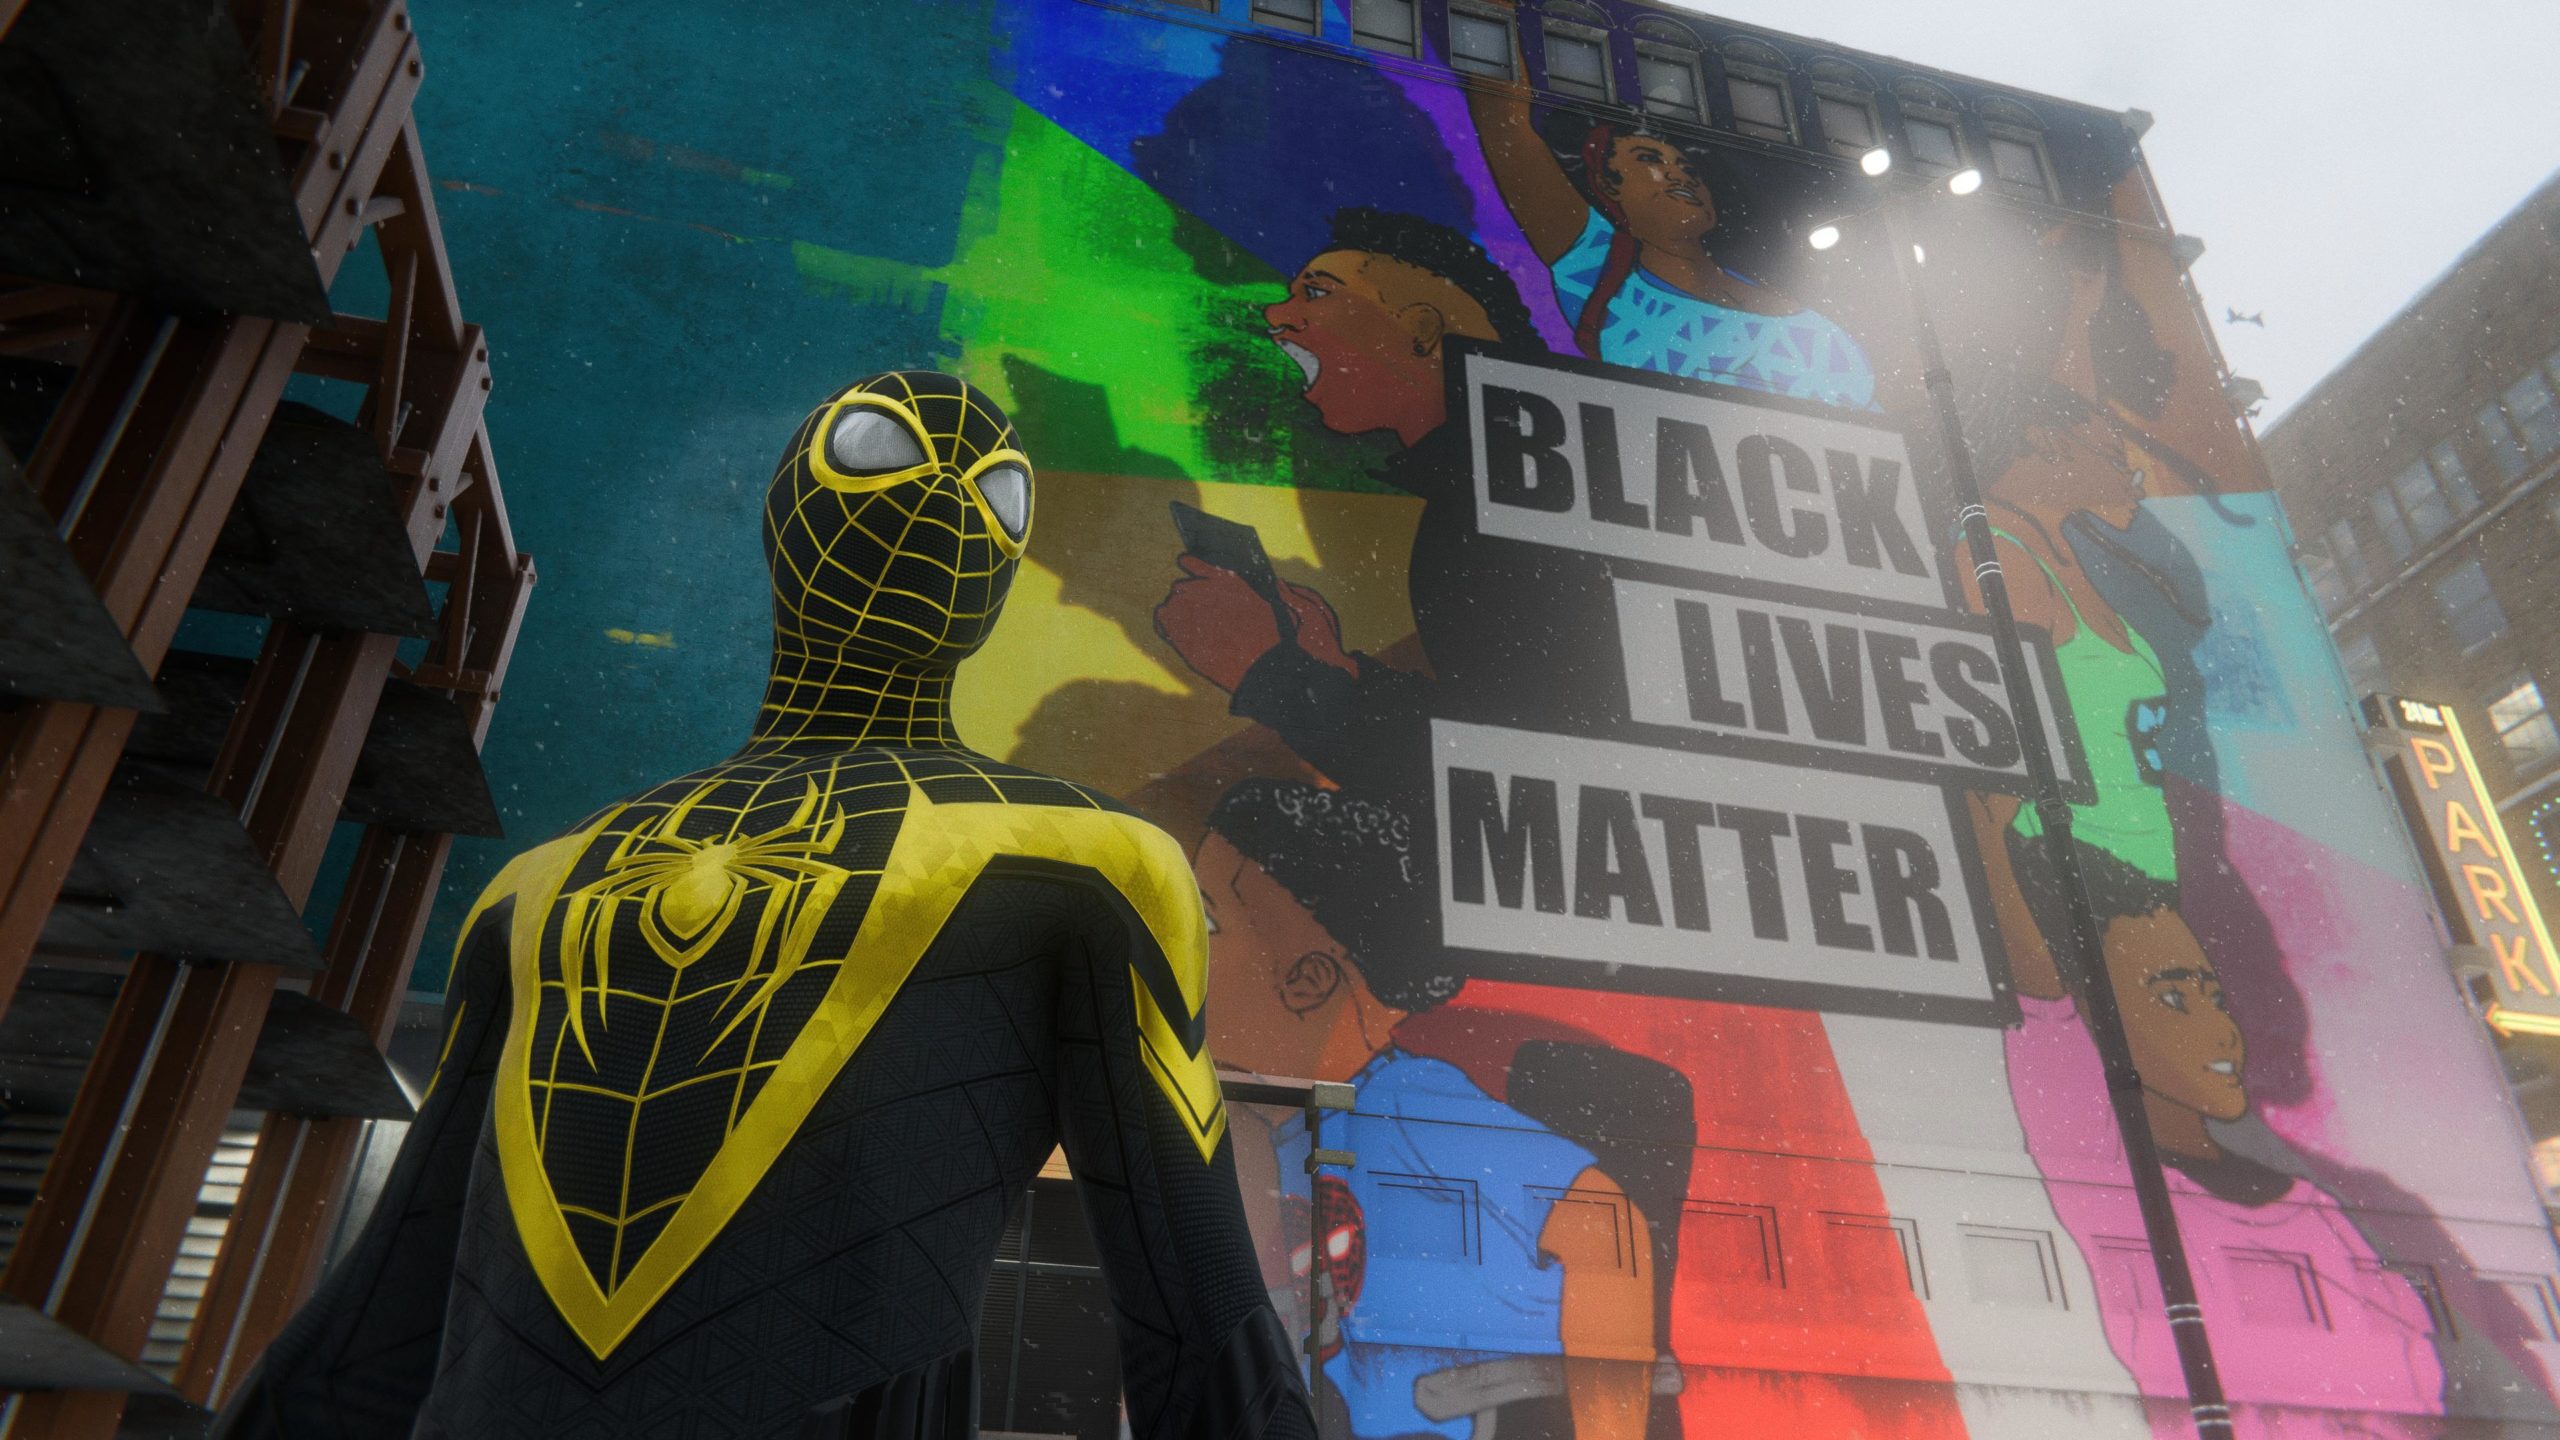 Best shots from Spider-Man: Miles Morales' photo mode on the PS4